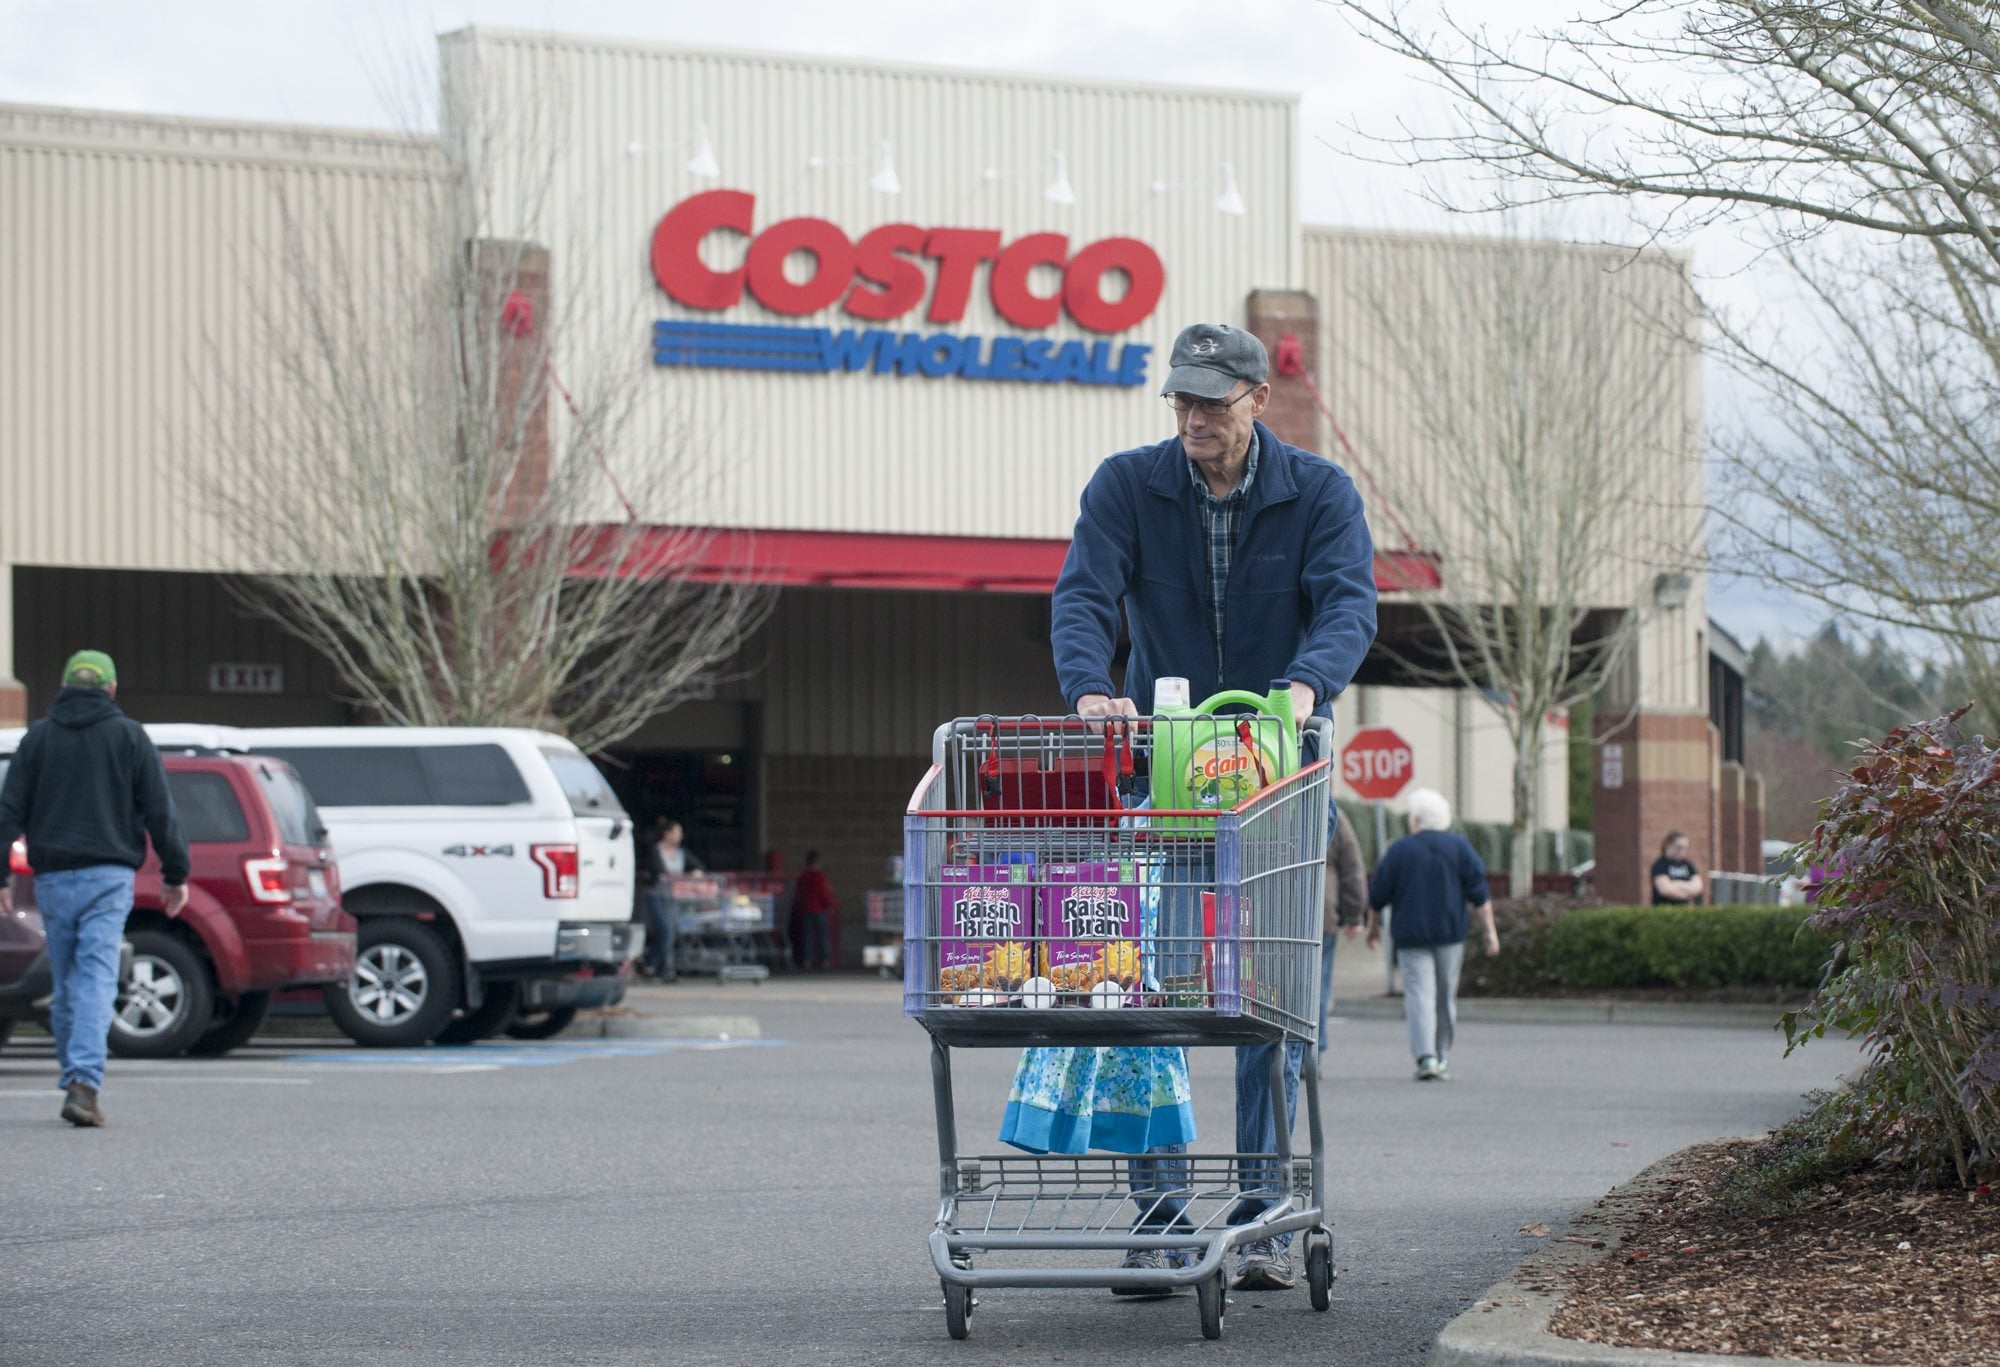 Costco at 6720 N.E. 84th St. is among the properties that could be annexed into Vancouver city limits if the city council decides to move forward with annexation plans that were shelved due to the Great Recession.